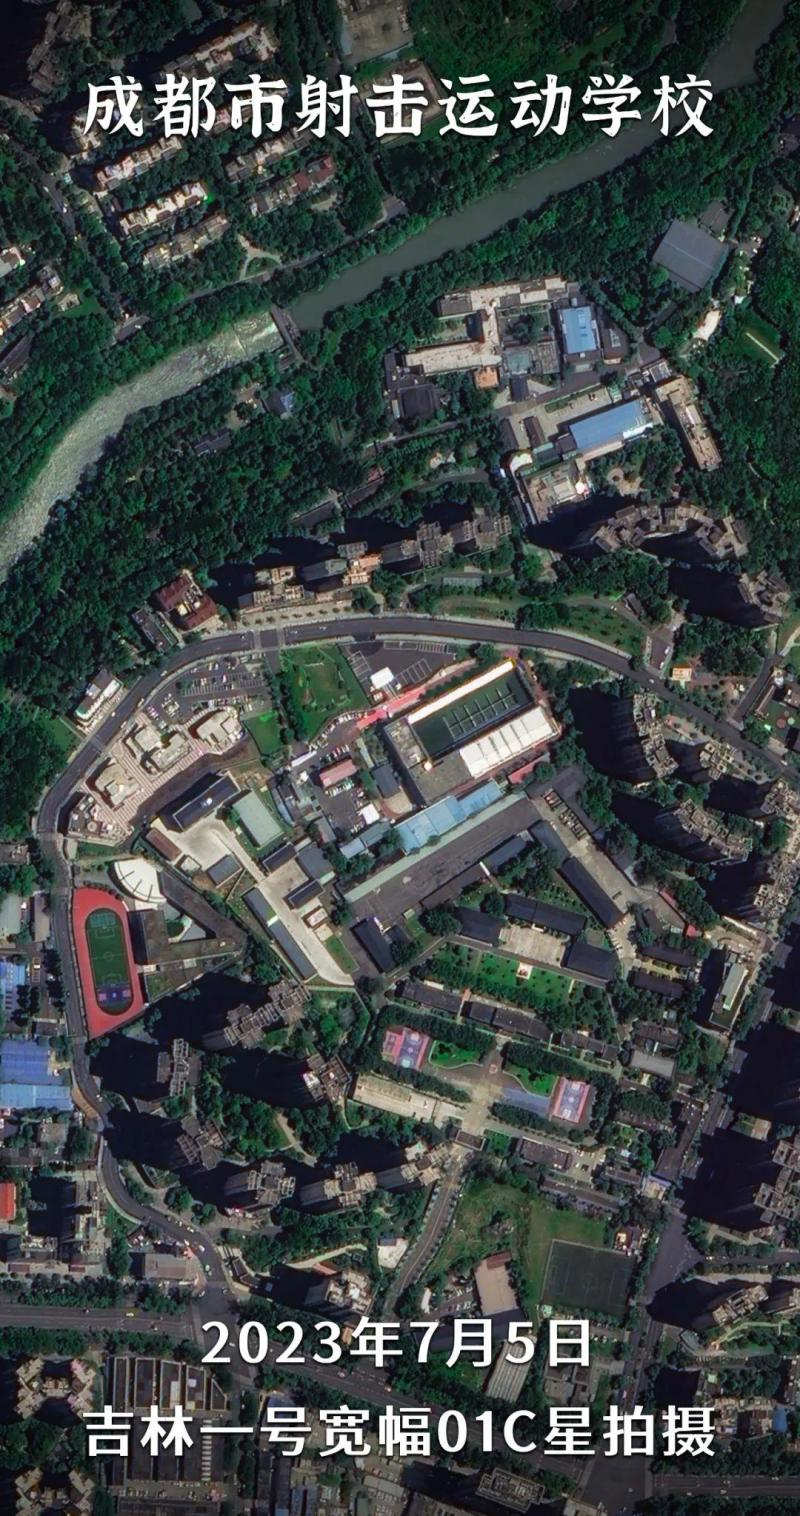 Check in the "Sichuan style" venues of the Chengdu Universiade from a satellite perspective! Venue | Competition | Universiade